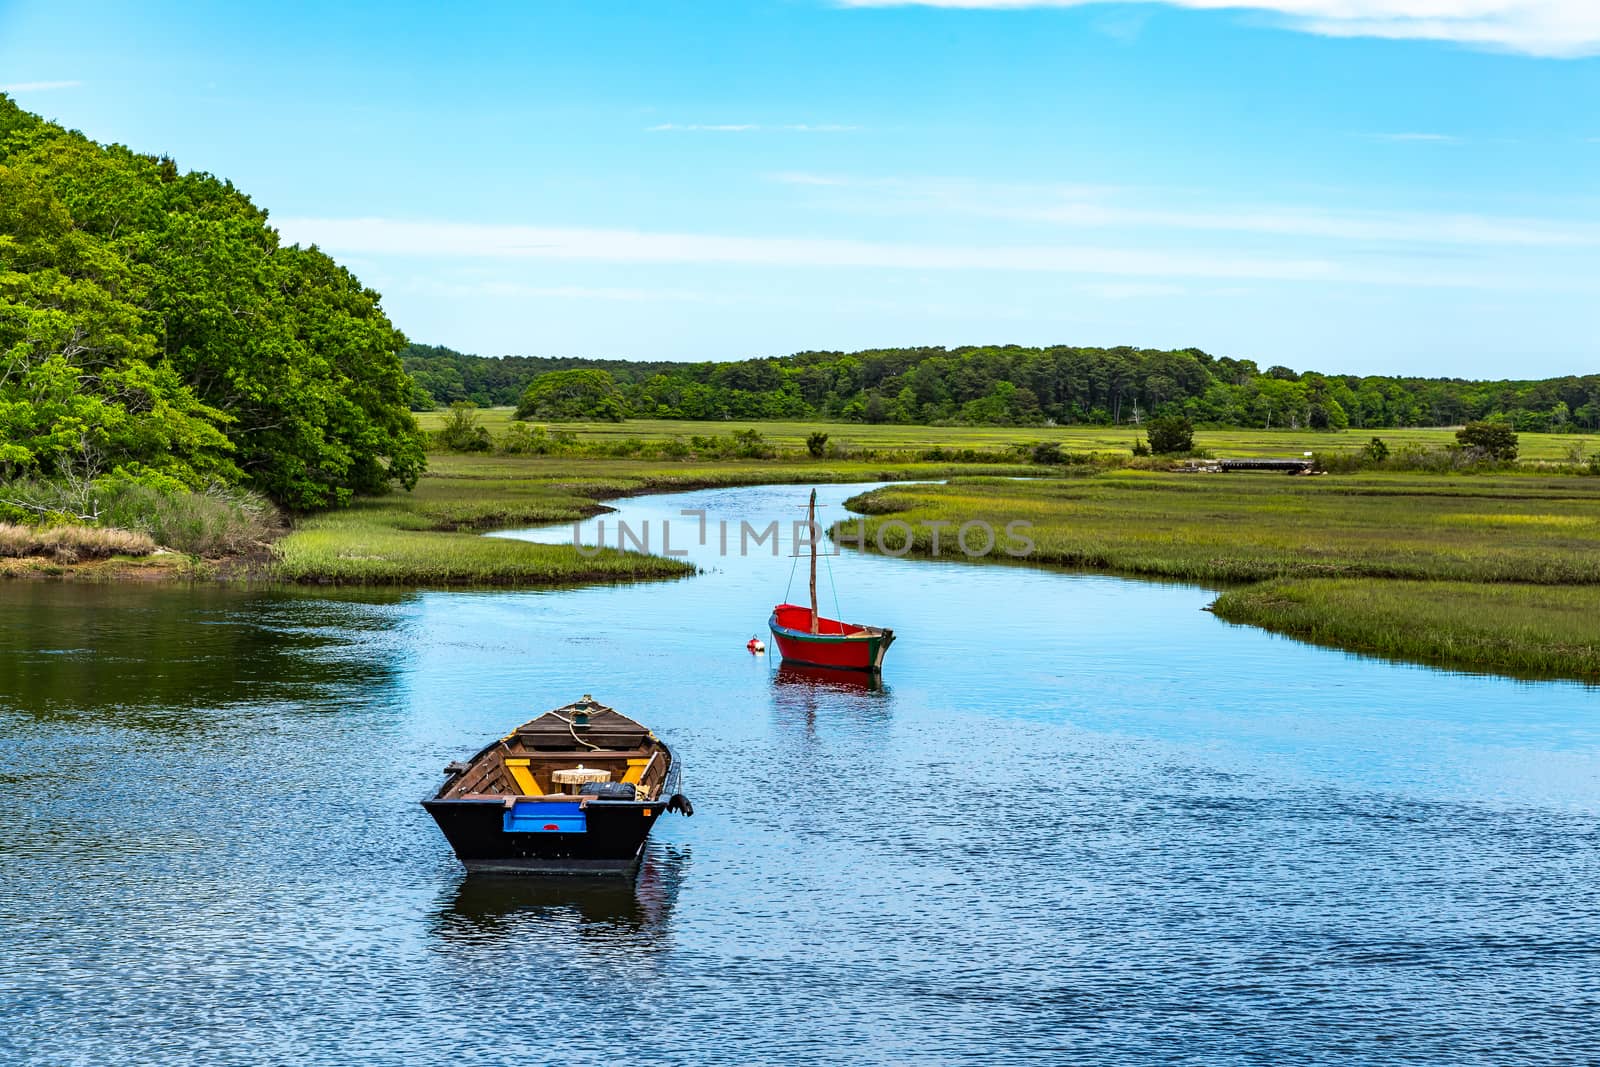 Two boats lay at anchor on the Herring River at Harwich, Massachusetts on Cape Cod.